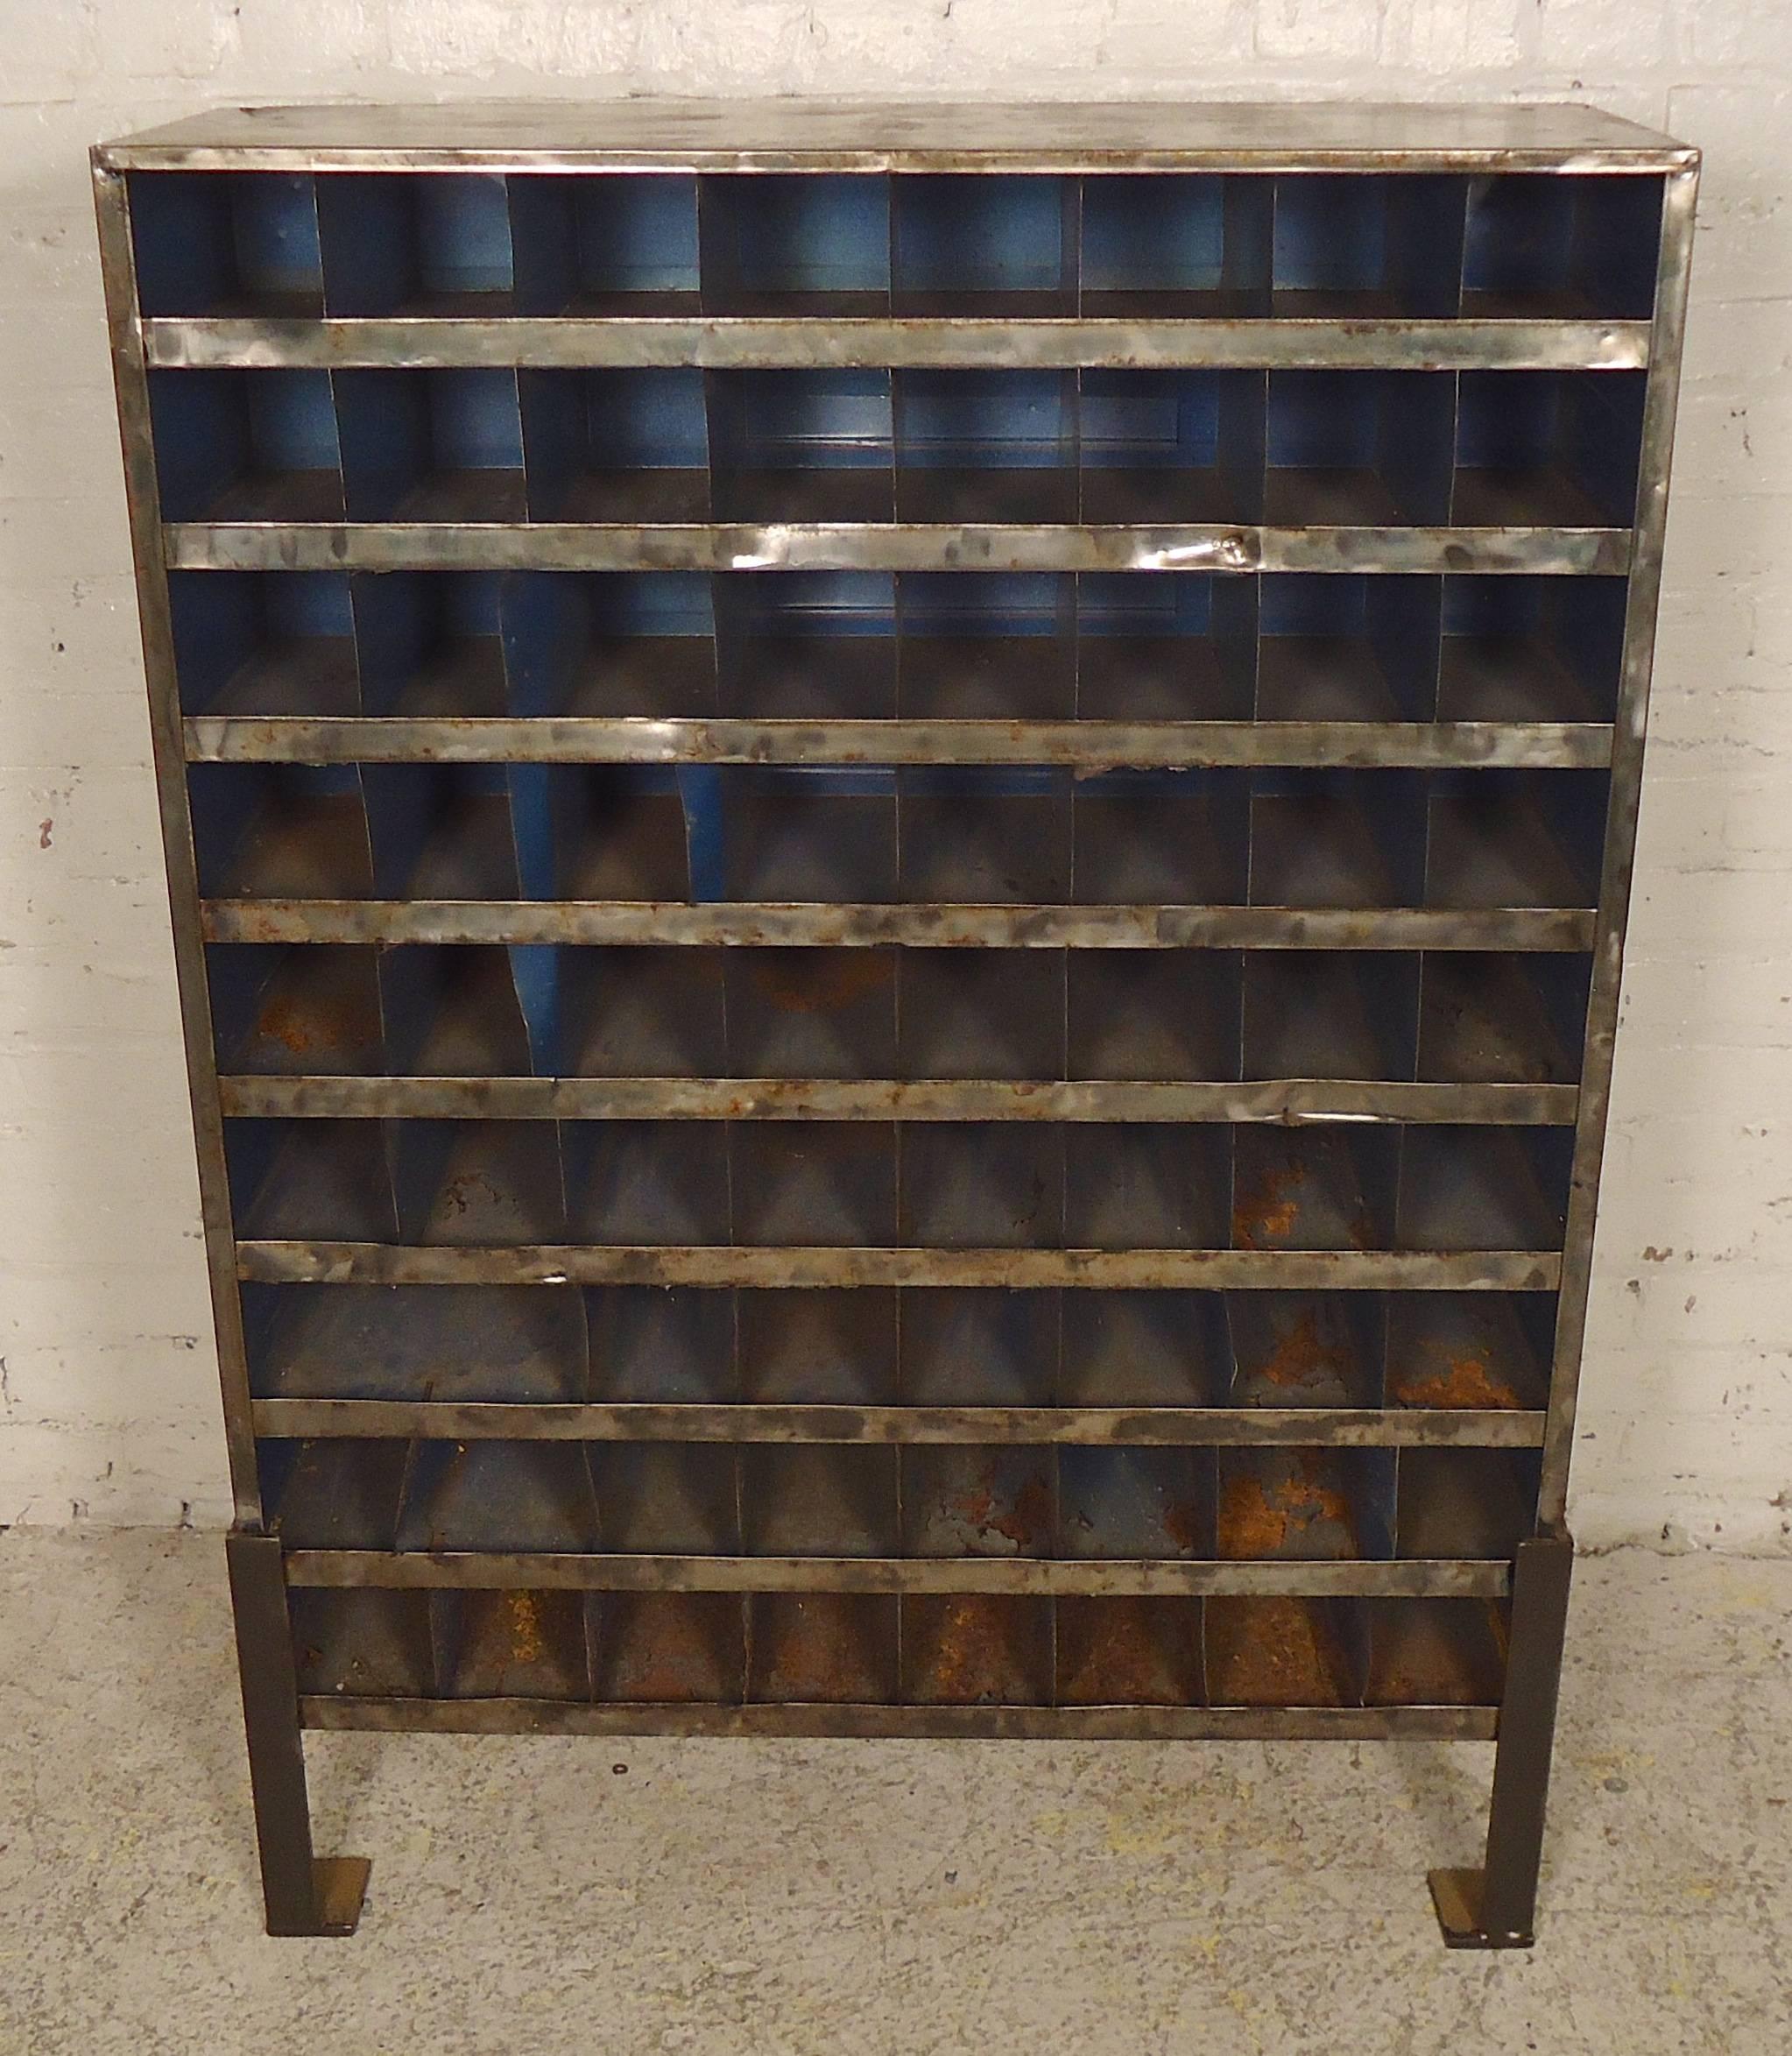 Unique factory storage unit, refinished in a bare metal style finish. Seventy plus units, solid feet, heavy duty industrial feel.
4